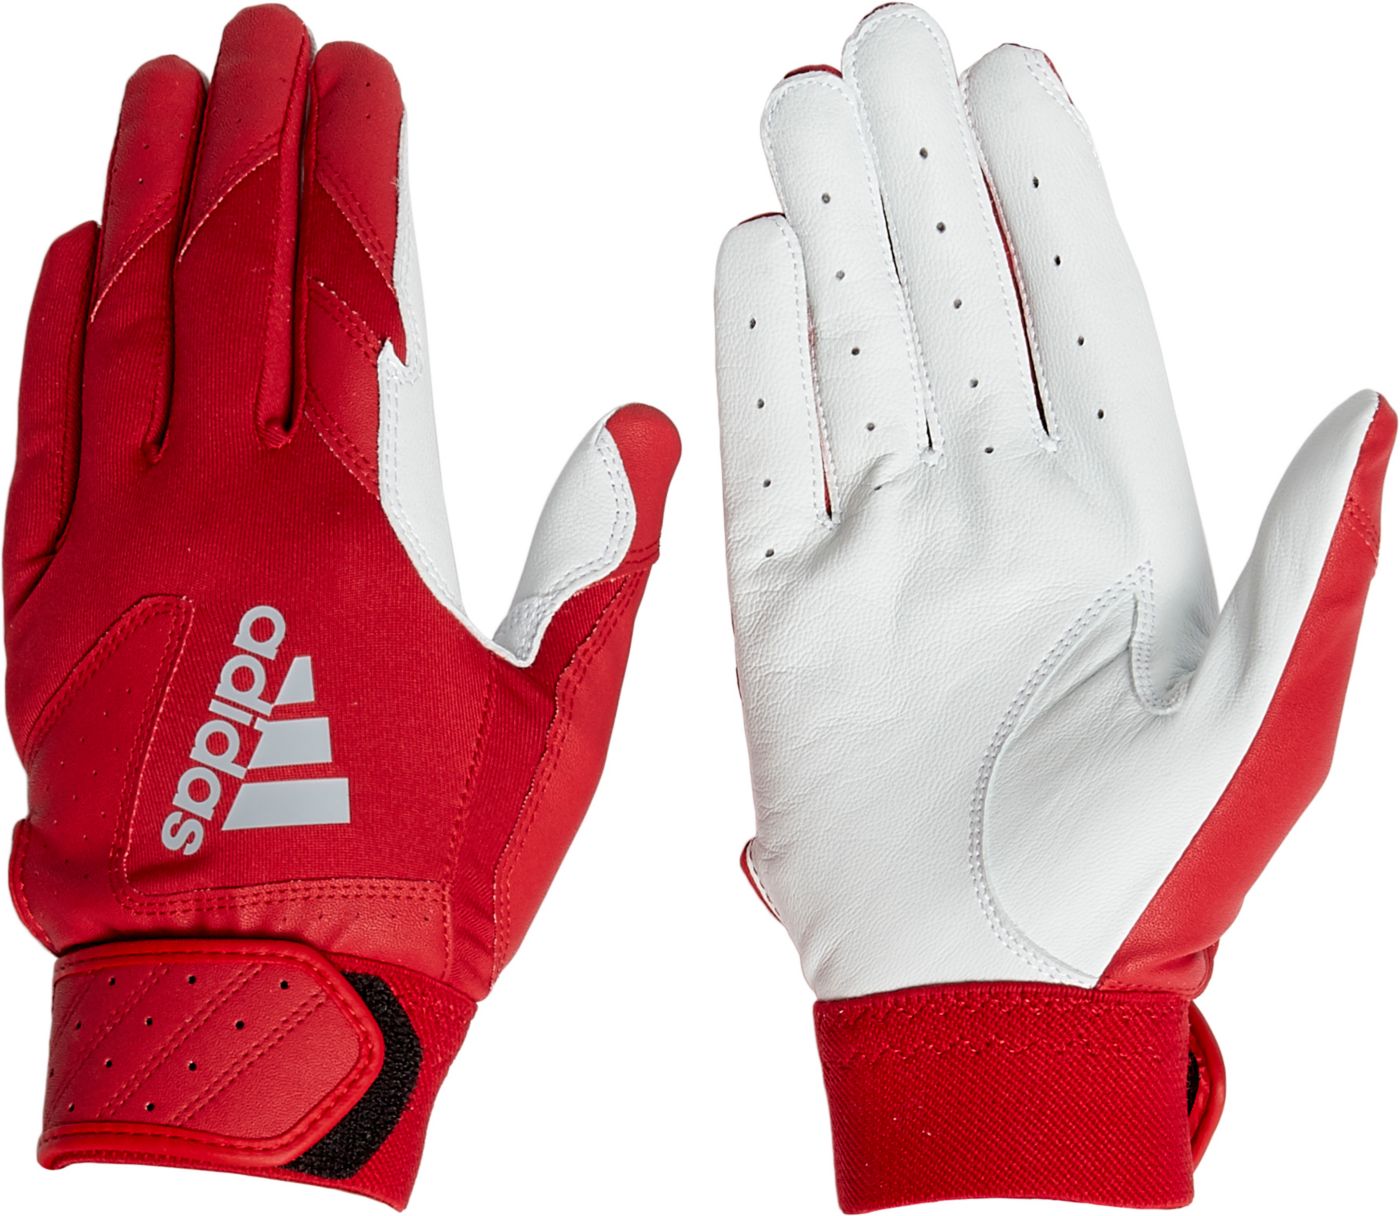 adidas Youth Trilogy Batting Gloves 2019 DICK'S Sporting Goods